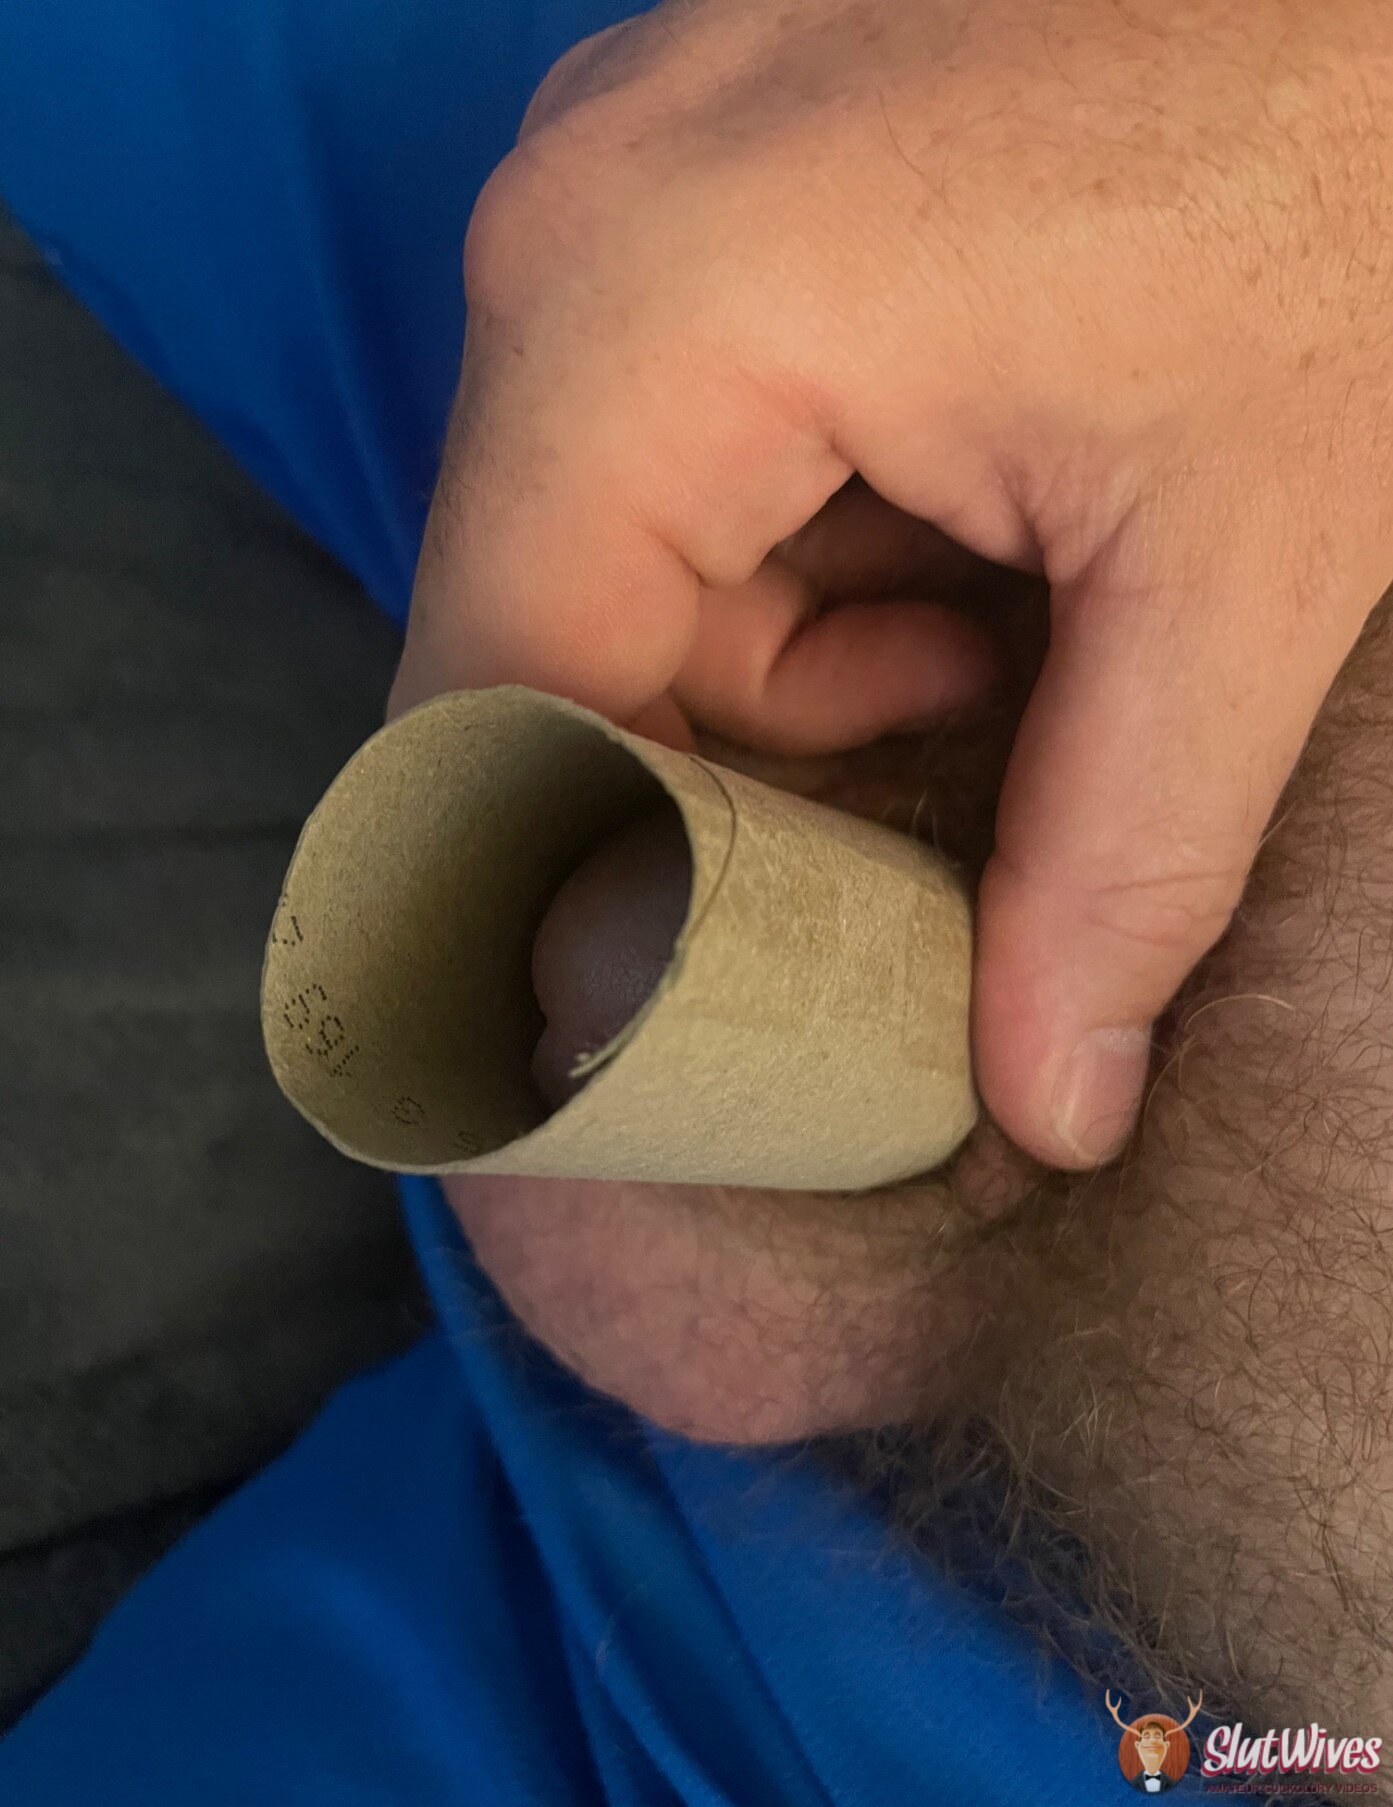 tiny dick lose in toilet roll holder